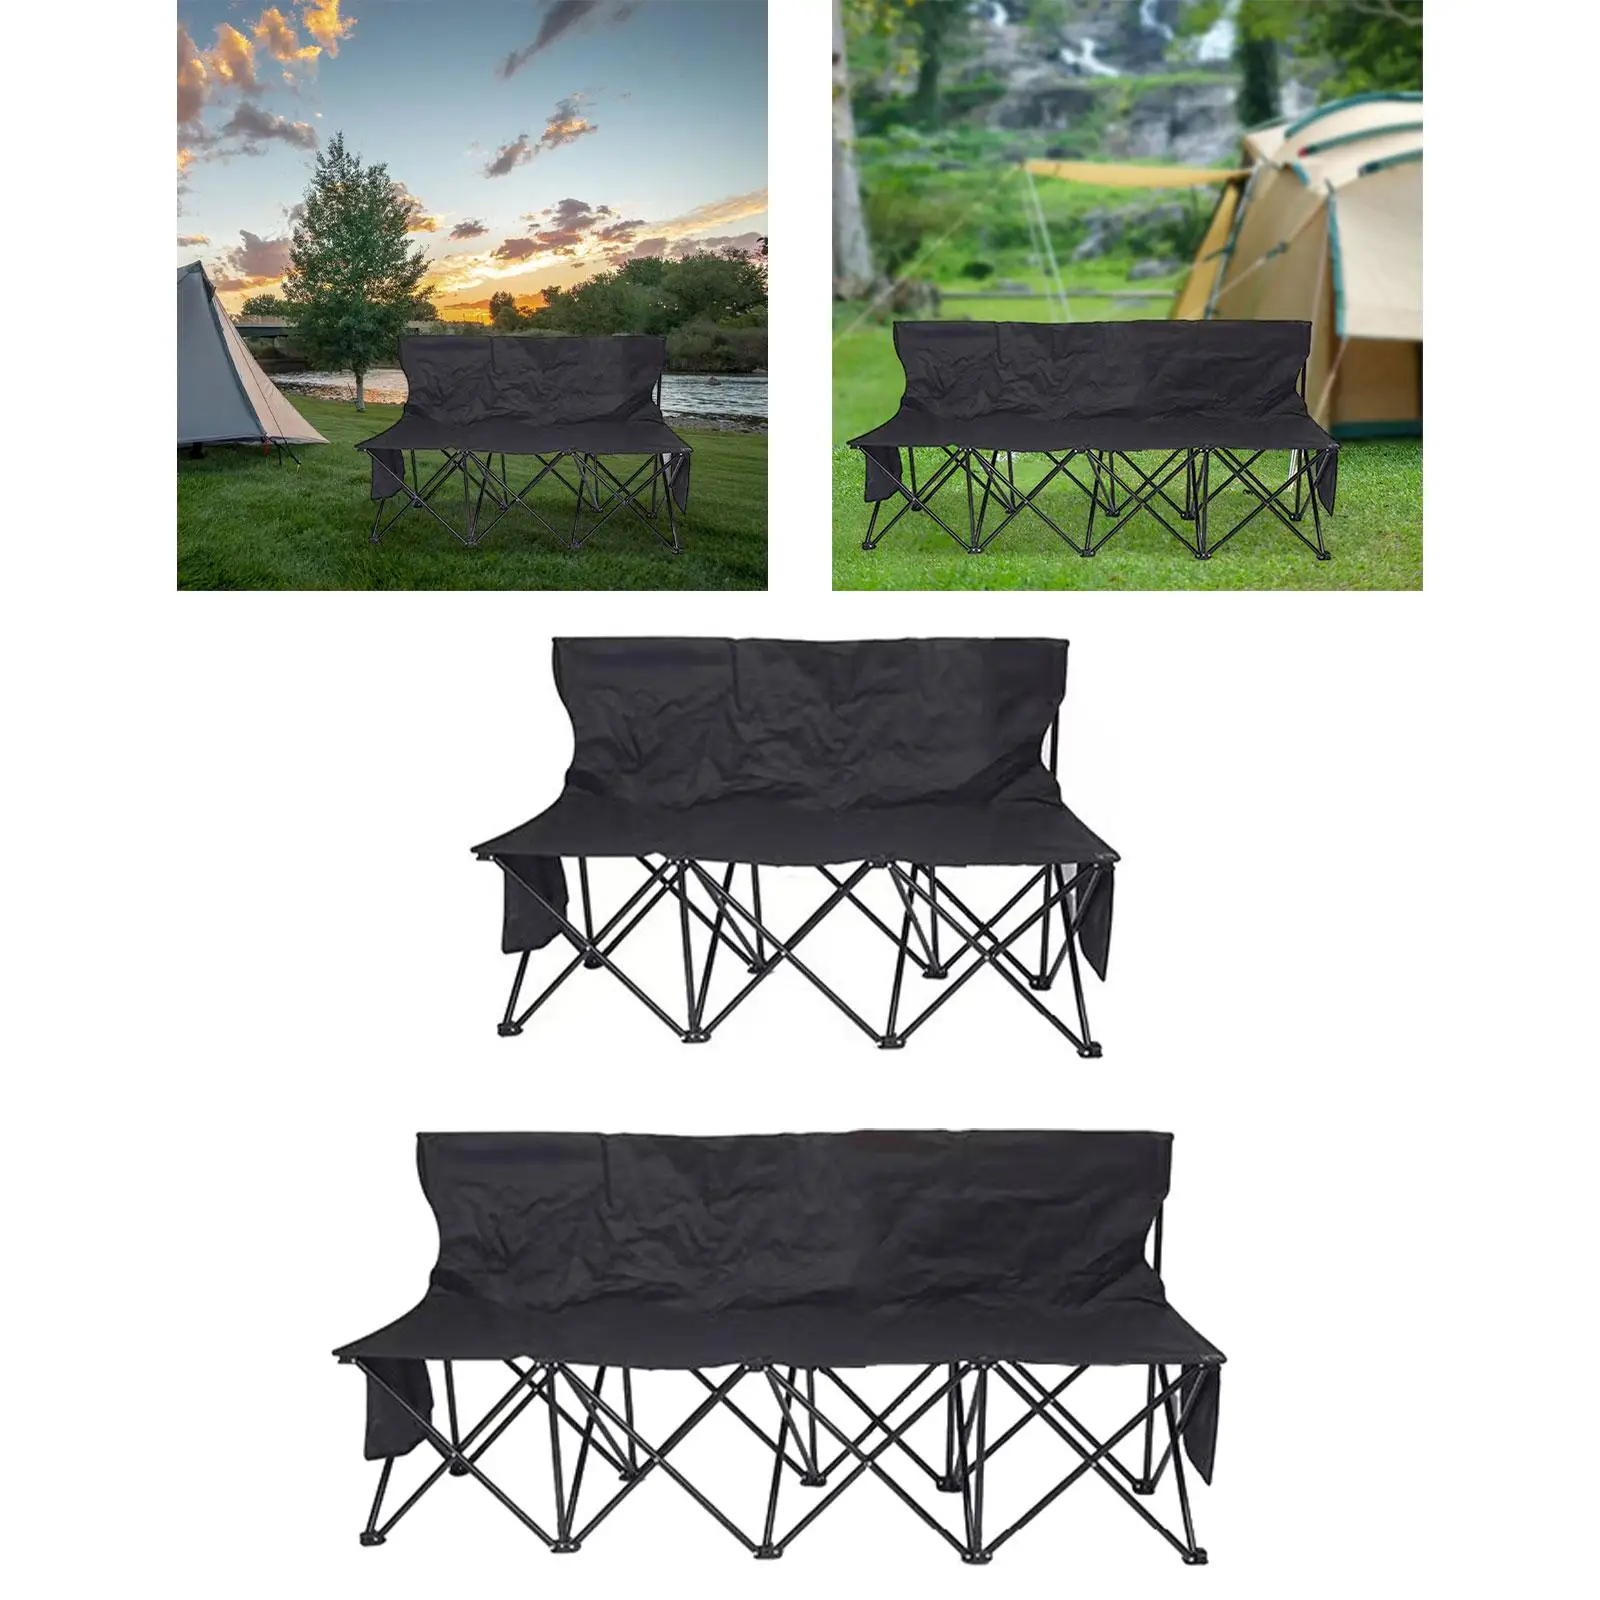 Folding Bench Folding Camping Chair Portable Lightweight Multi-person Side Bench